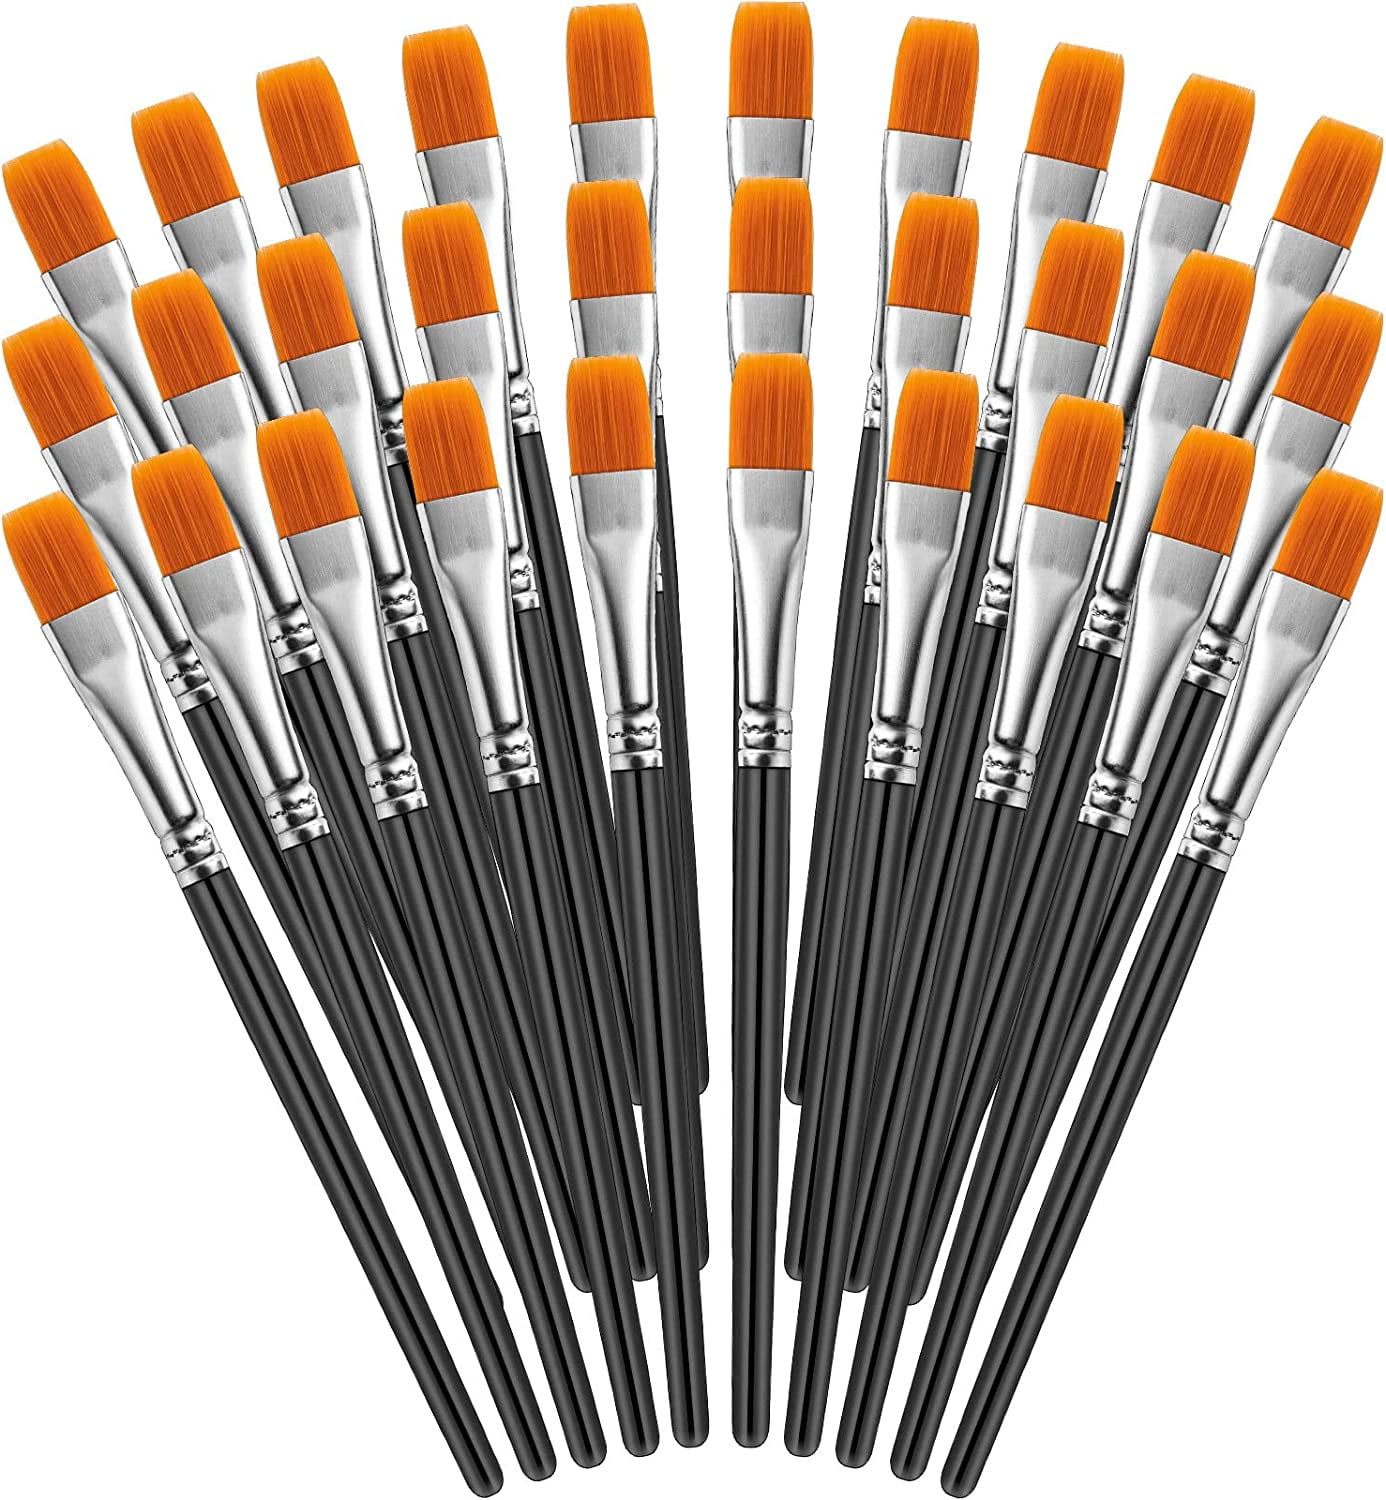 Paint Brushes for Kids, 30 Pcs Flat Kids Paint Brushes, Easy to Use